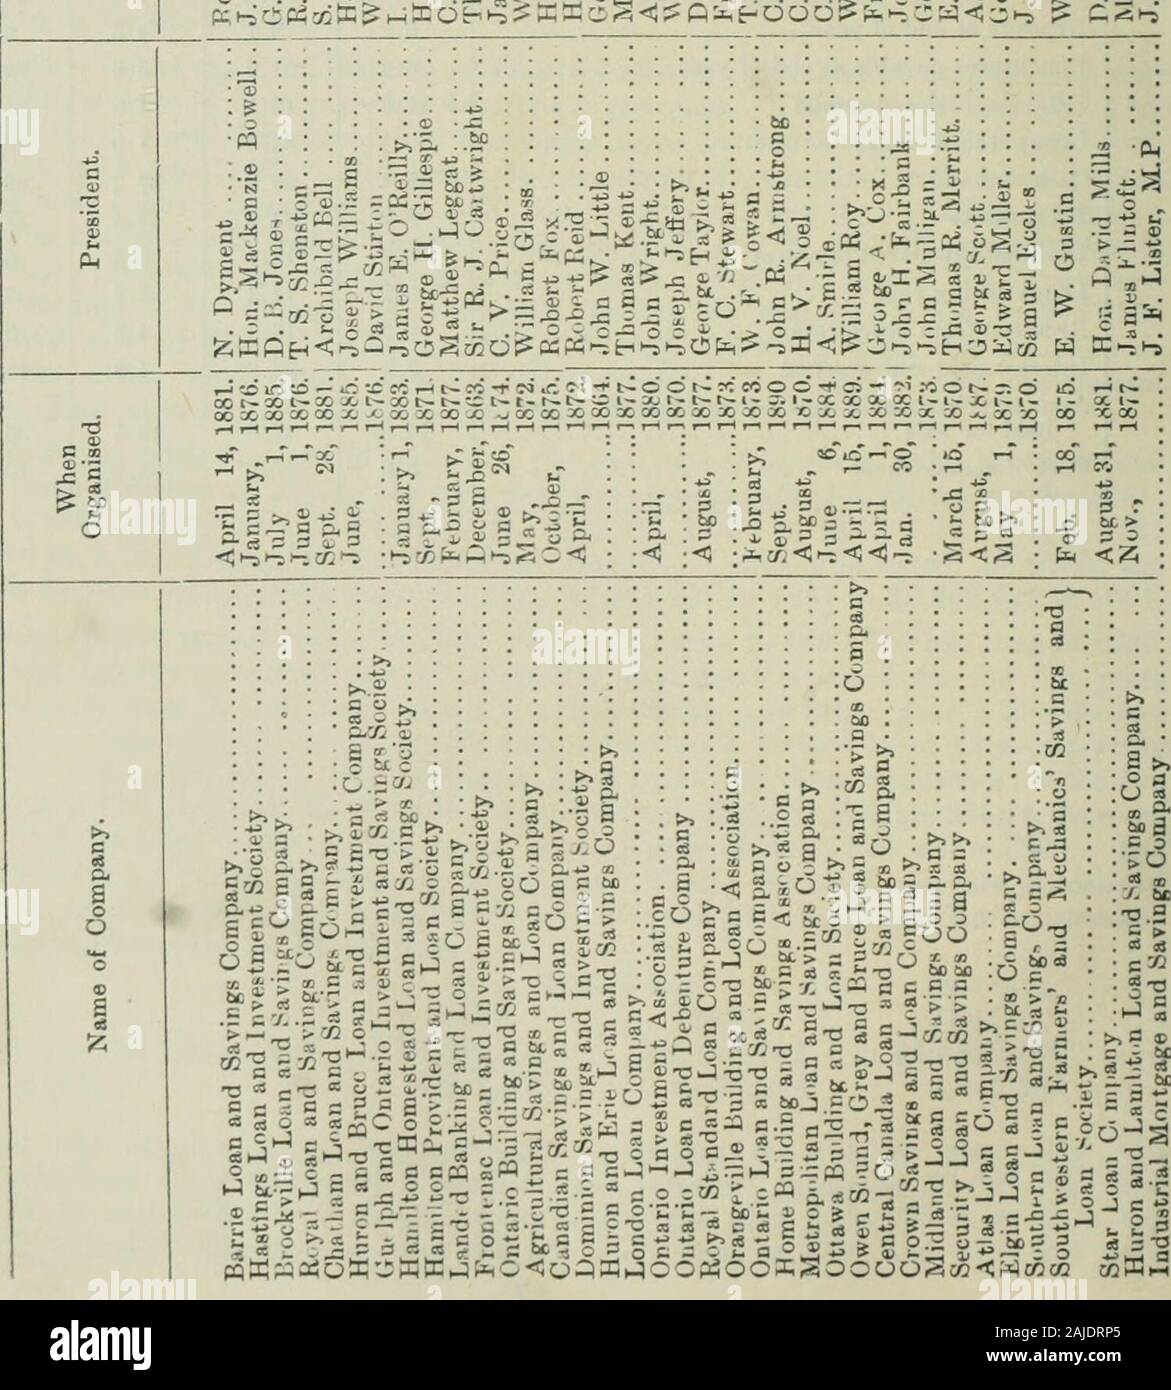 Ontario Sessional Papers, 1892, 1 Report . .942.134.685.934.513.7U.416.429.3 57.627.9 64 companies. Increase over- 1890, ^h -1.50.23.40.84.55 64.51.937.53.40.3 -2.74.34.8 13.5—1.2 1887. U 7.7 7.527.511.2 0.832 221.418.462.317.2 fi.3-2.1 5.016.6 38.110.6 55 Victoria. Sessional Papers (No. ). A.1892 C3 Co c:o5CiSioo;c;r:c;. r5c:c:c2C5r:&lt;r. r:cvoo50a3. c;cj3;c5a; T. OC5 Ci ocioi 0CaC0C»XCC3C0C00Ma:oCCC0CX0CX(»00X00XCOX00O00C00(»X0030:O CO 000000 CO so ec S ?c ec CO CO M cc ec « CO cc e&lt;3 CO ec w w ec w :&lt;: c^ c&lt;5 (X c£^2^-S-S5cCcCCCCCSC5«c8c!r-^ rrr^^— —?— rrir o c n r. -r^ n c = k Stock Photo